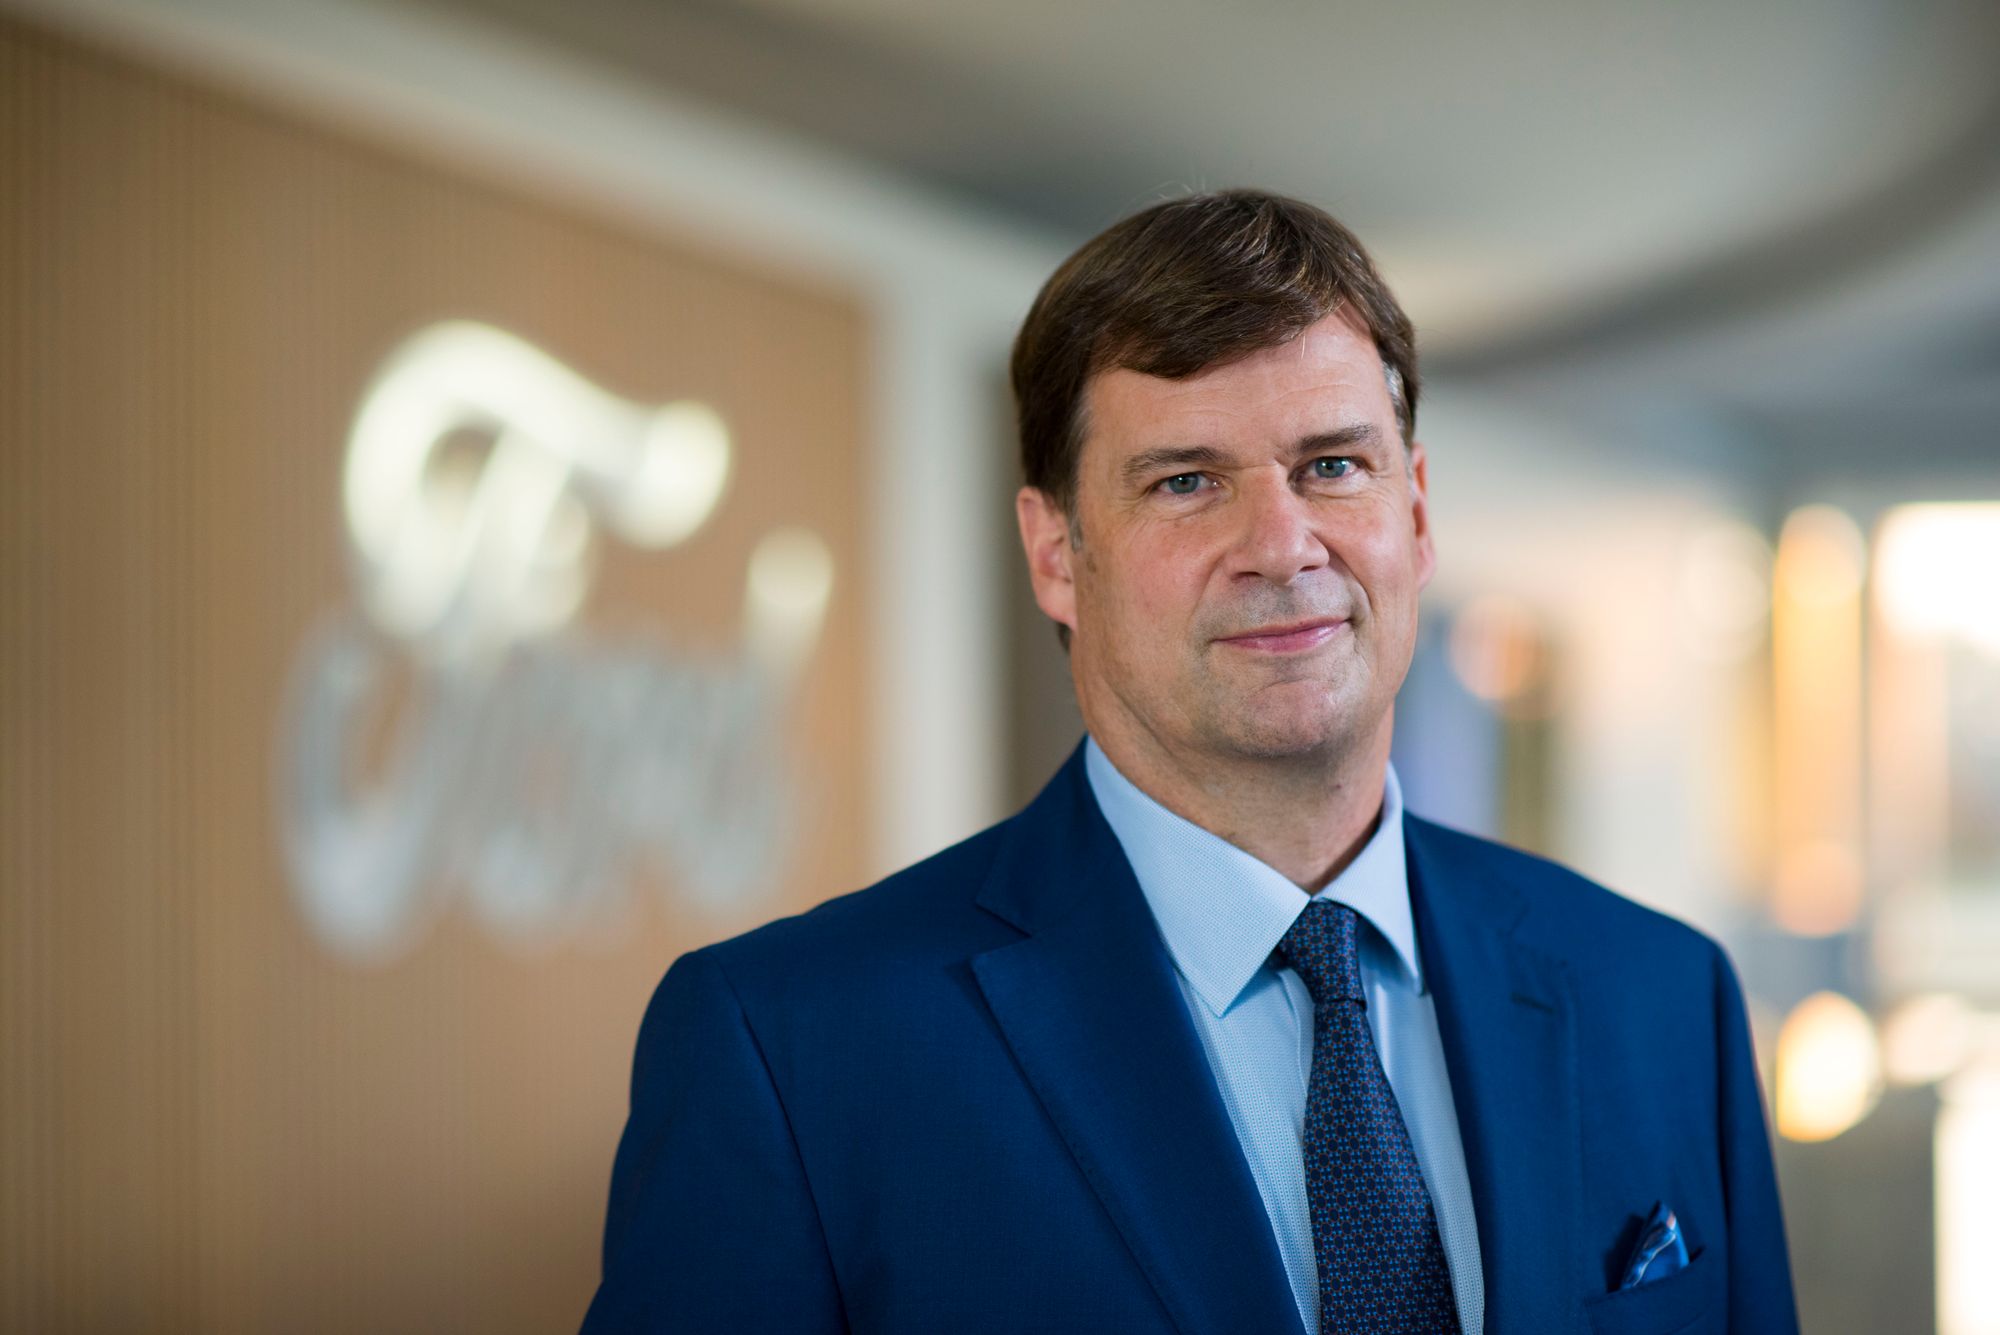 Jim Farley, President and CEO, Ford Motor Company